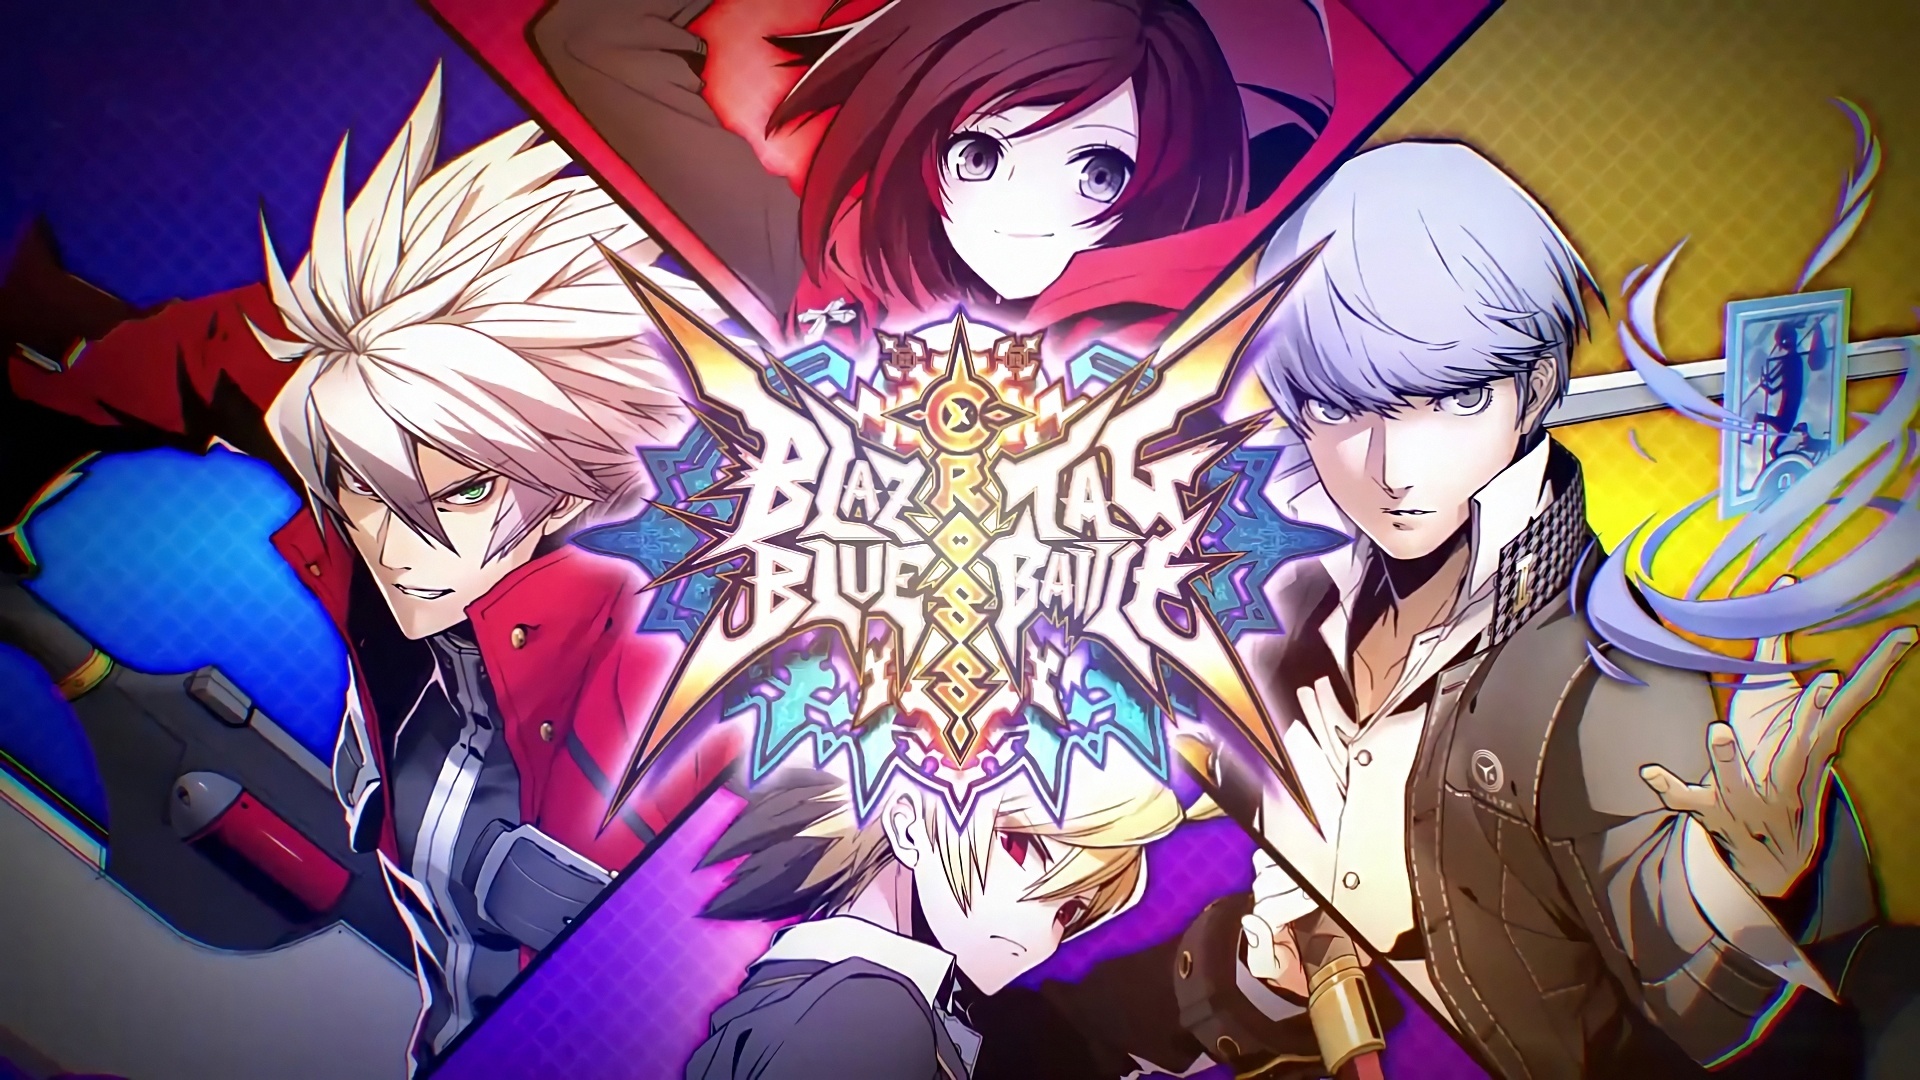 27 blazblue cross tag battle wallpapers on wallpapersafari blazblue cross tag battle wallpapers